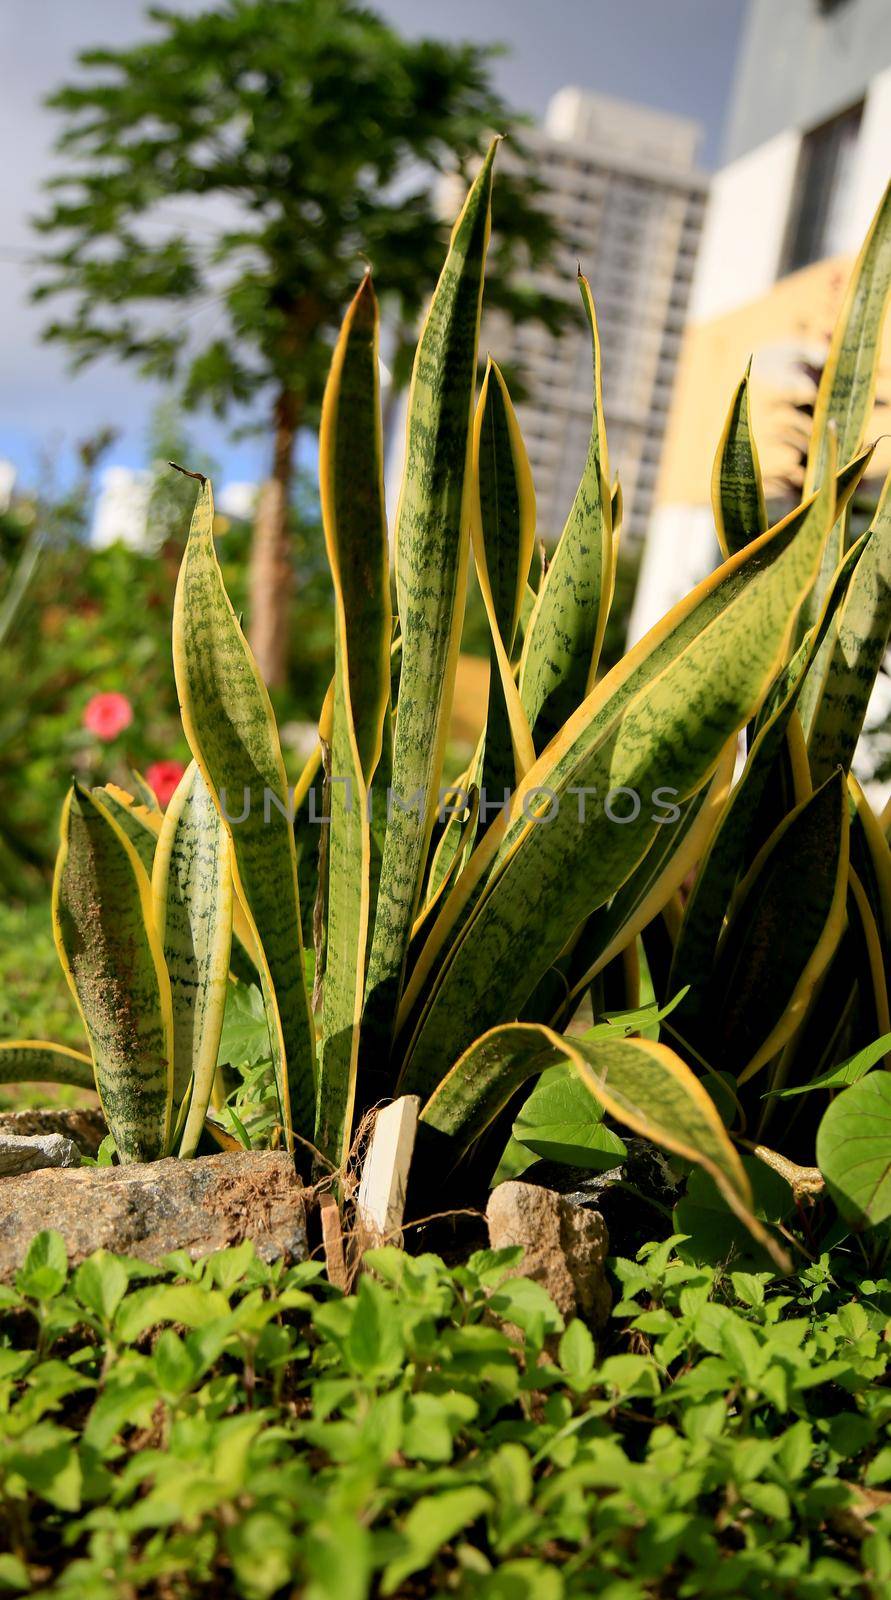 salvador, bahia / brazil - june 16, 2020: Dracaena Trifasciata plant popularly known as the sword of Sao Jorge or sword of Ogum, is seen in a condominium in the city of Salvador.